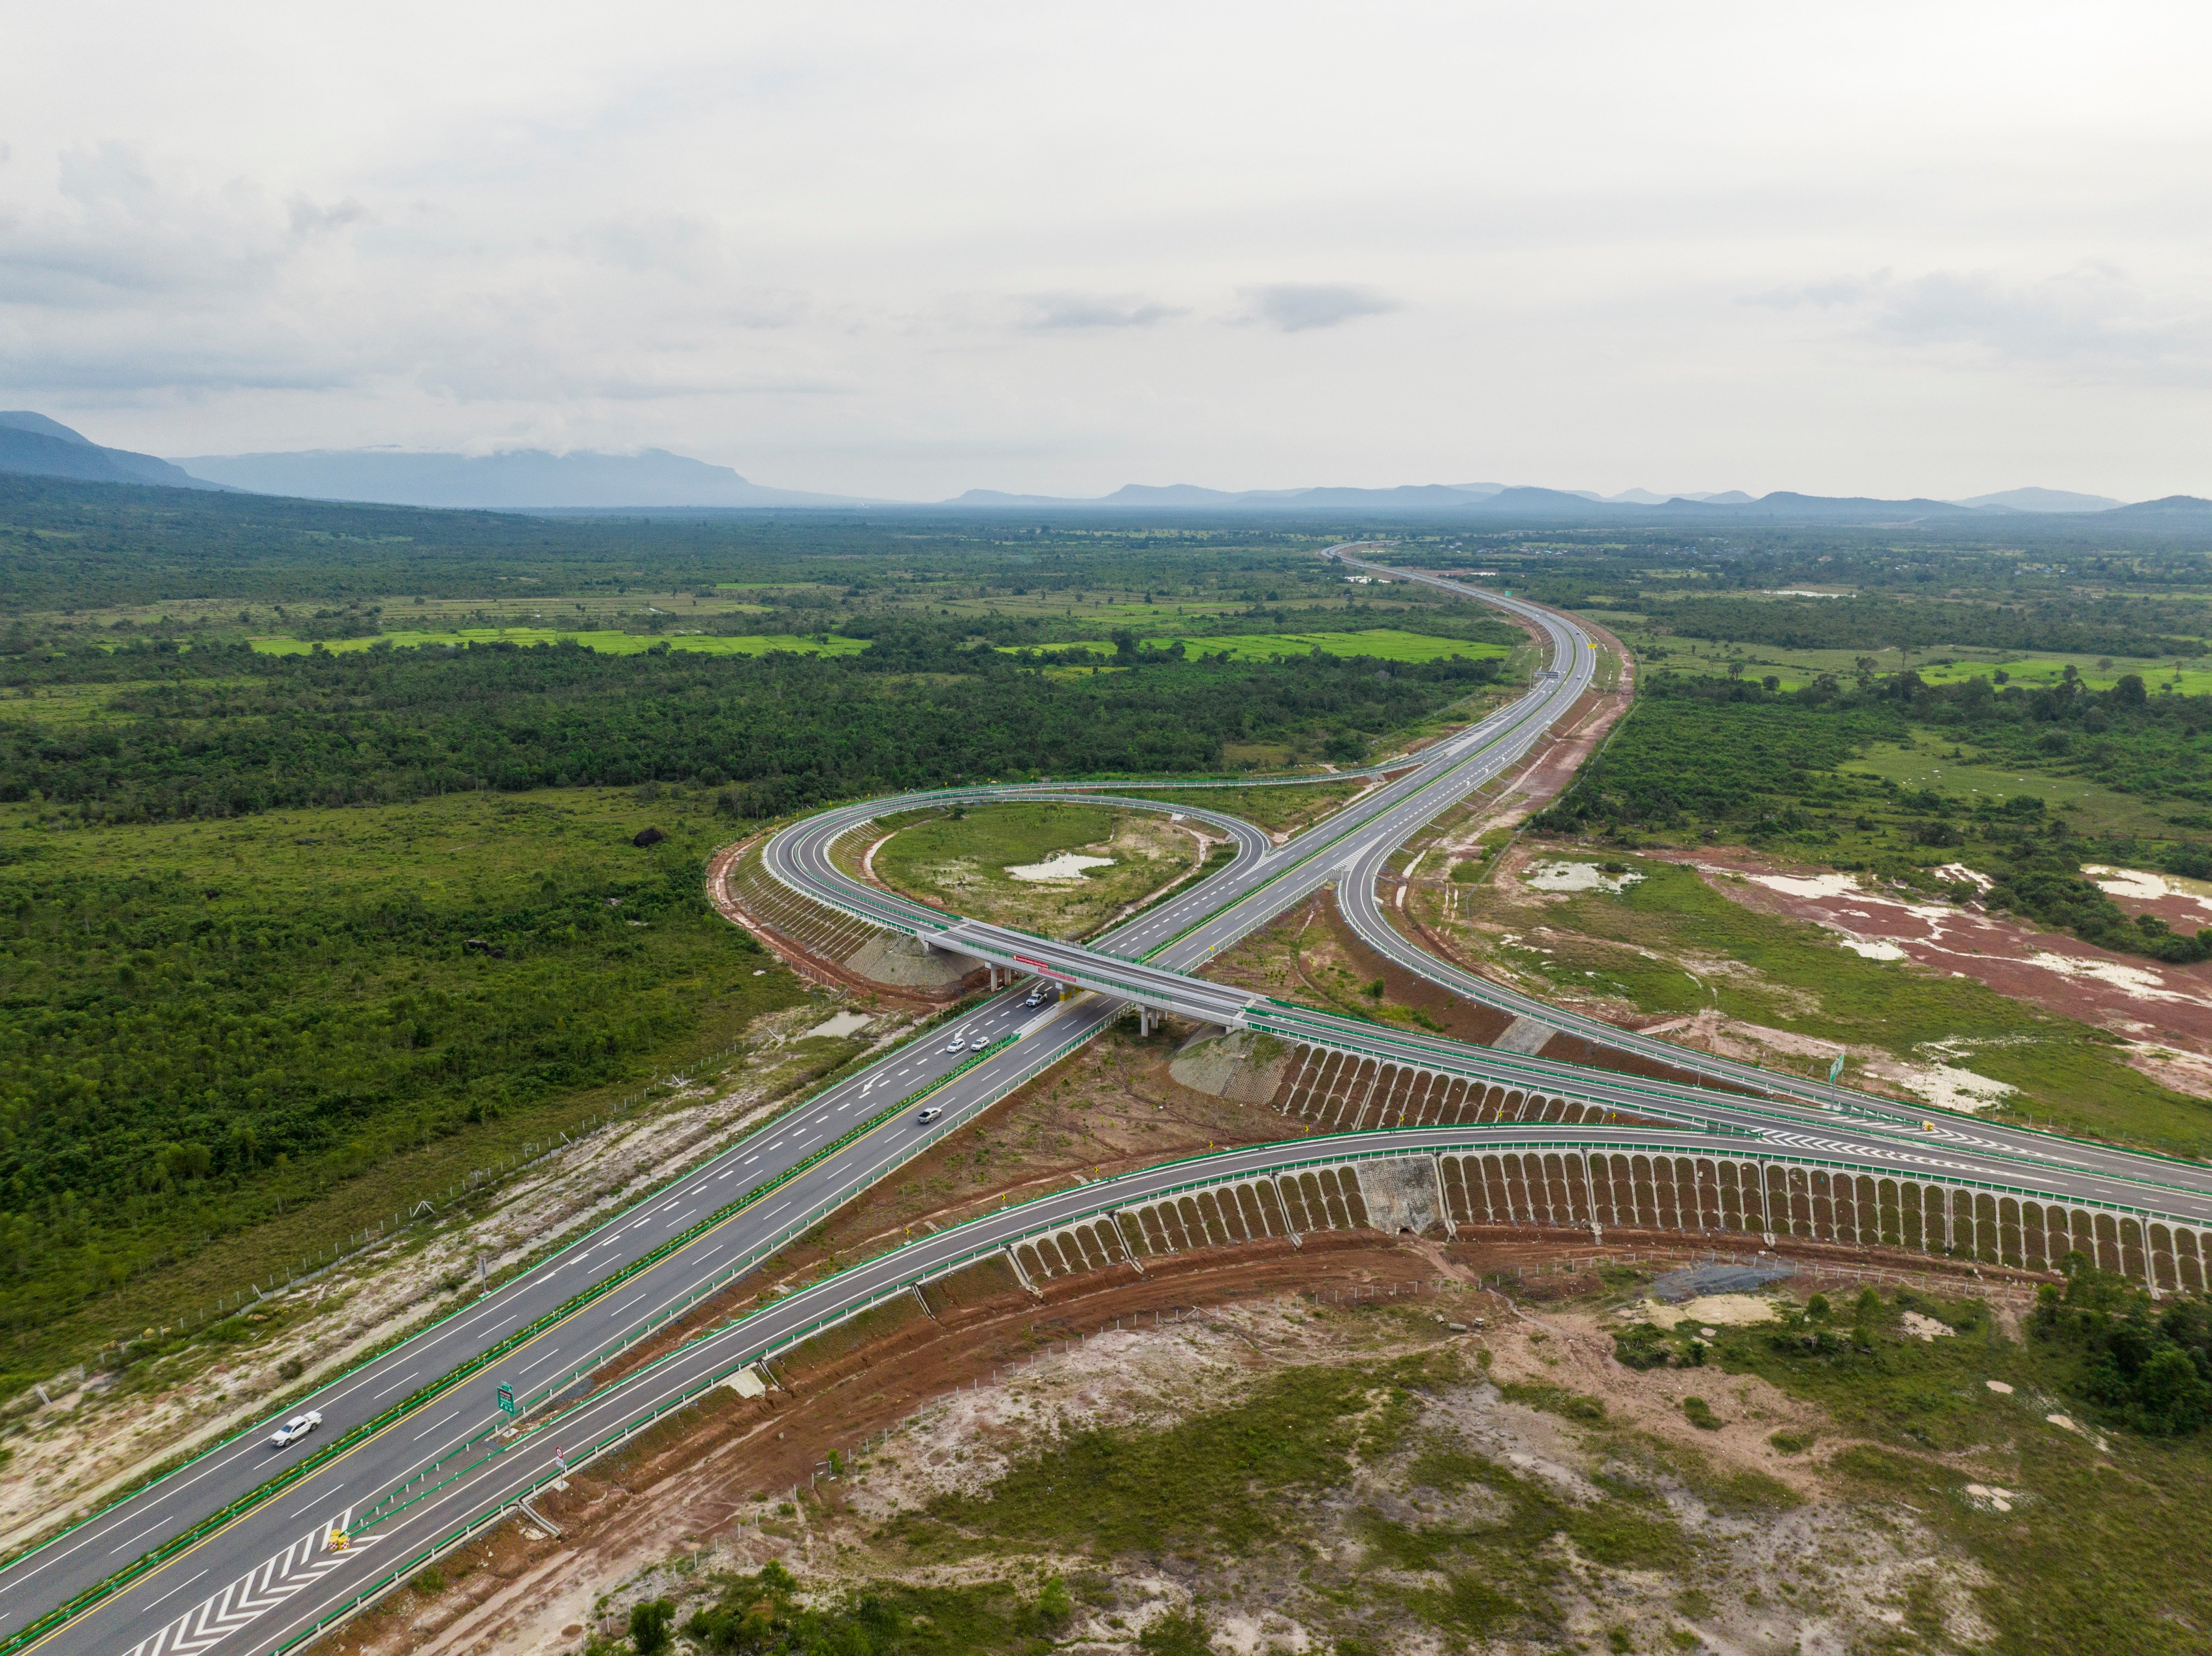 The Phnom Penh-Sihanoukville road in Cambodia. The route, funded by China, has been giving a boost to the country’s economic growth and tourism development, opening in October for a one-month free trial. Photo: Xinhua